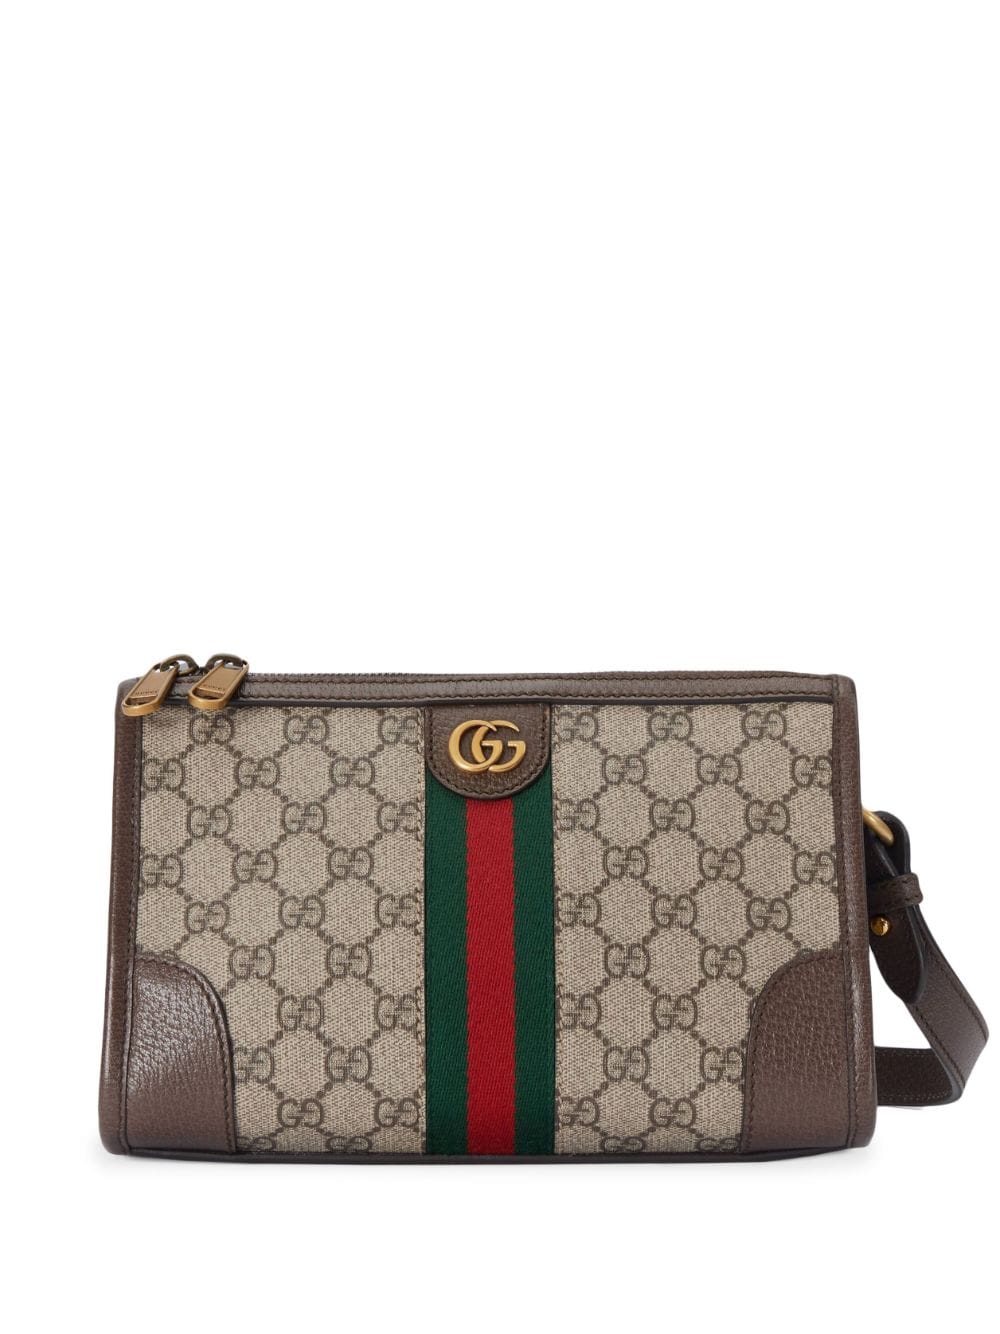 Gucci - Brown Ophidia GG Cross Body Bag - Men'S -  Leather/Linen/Flax/Cotton/Canvas for Men